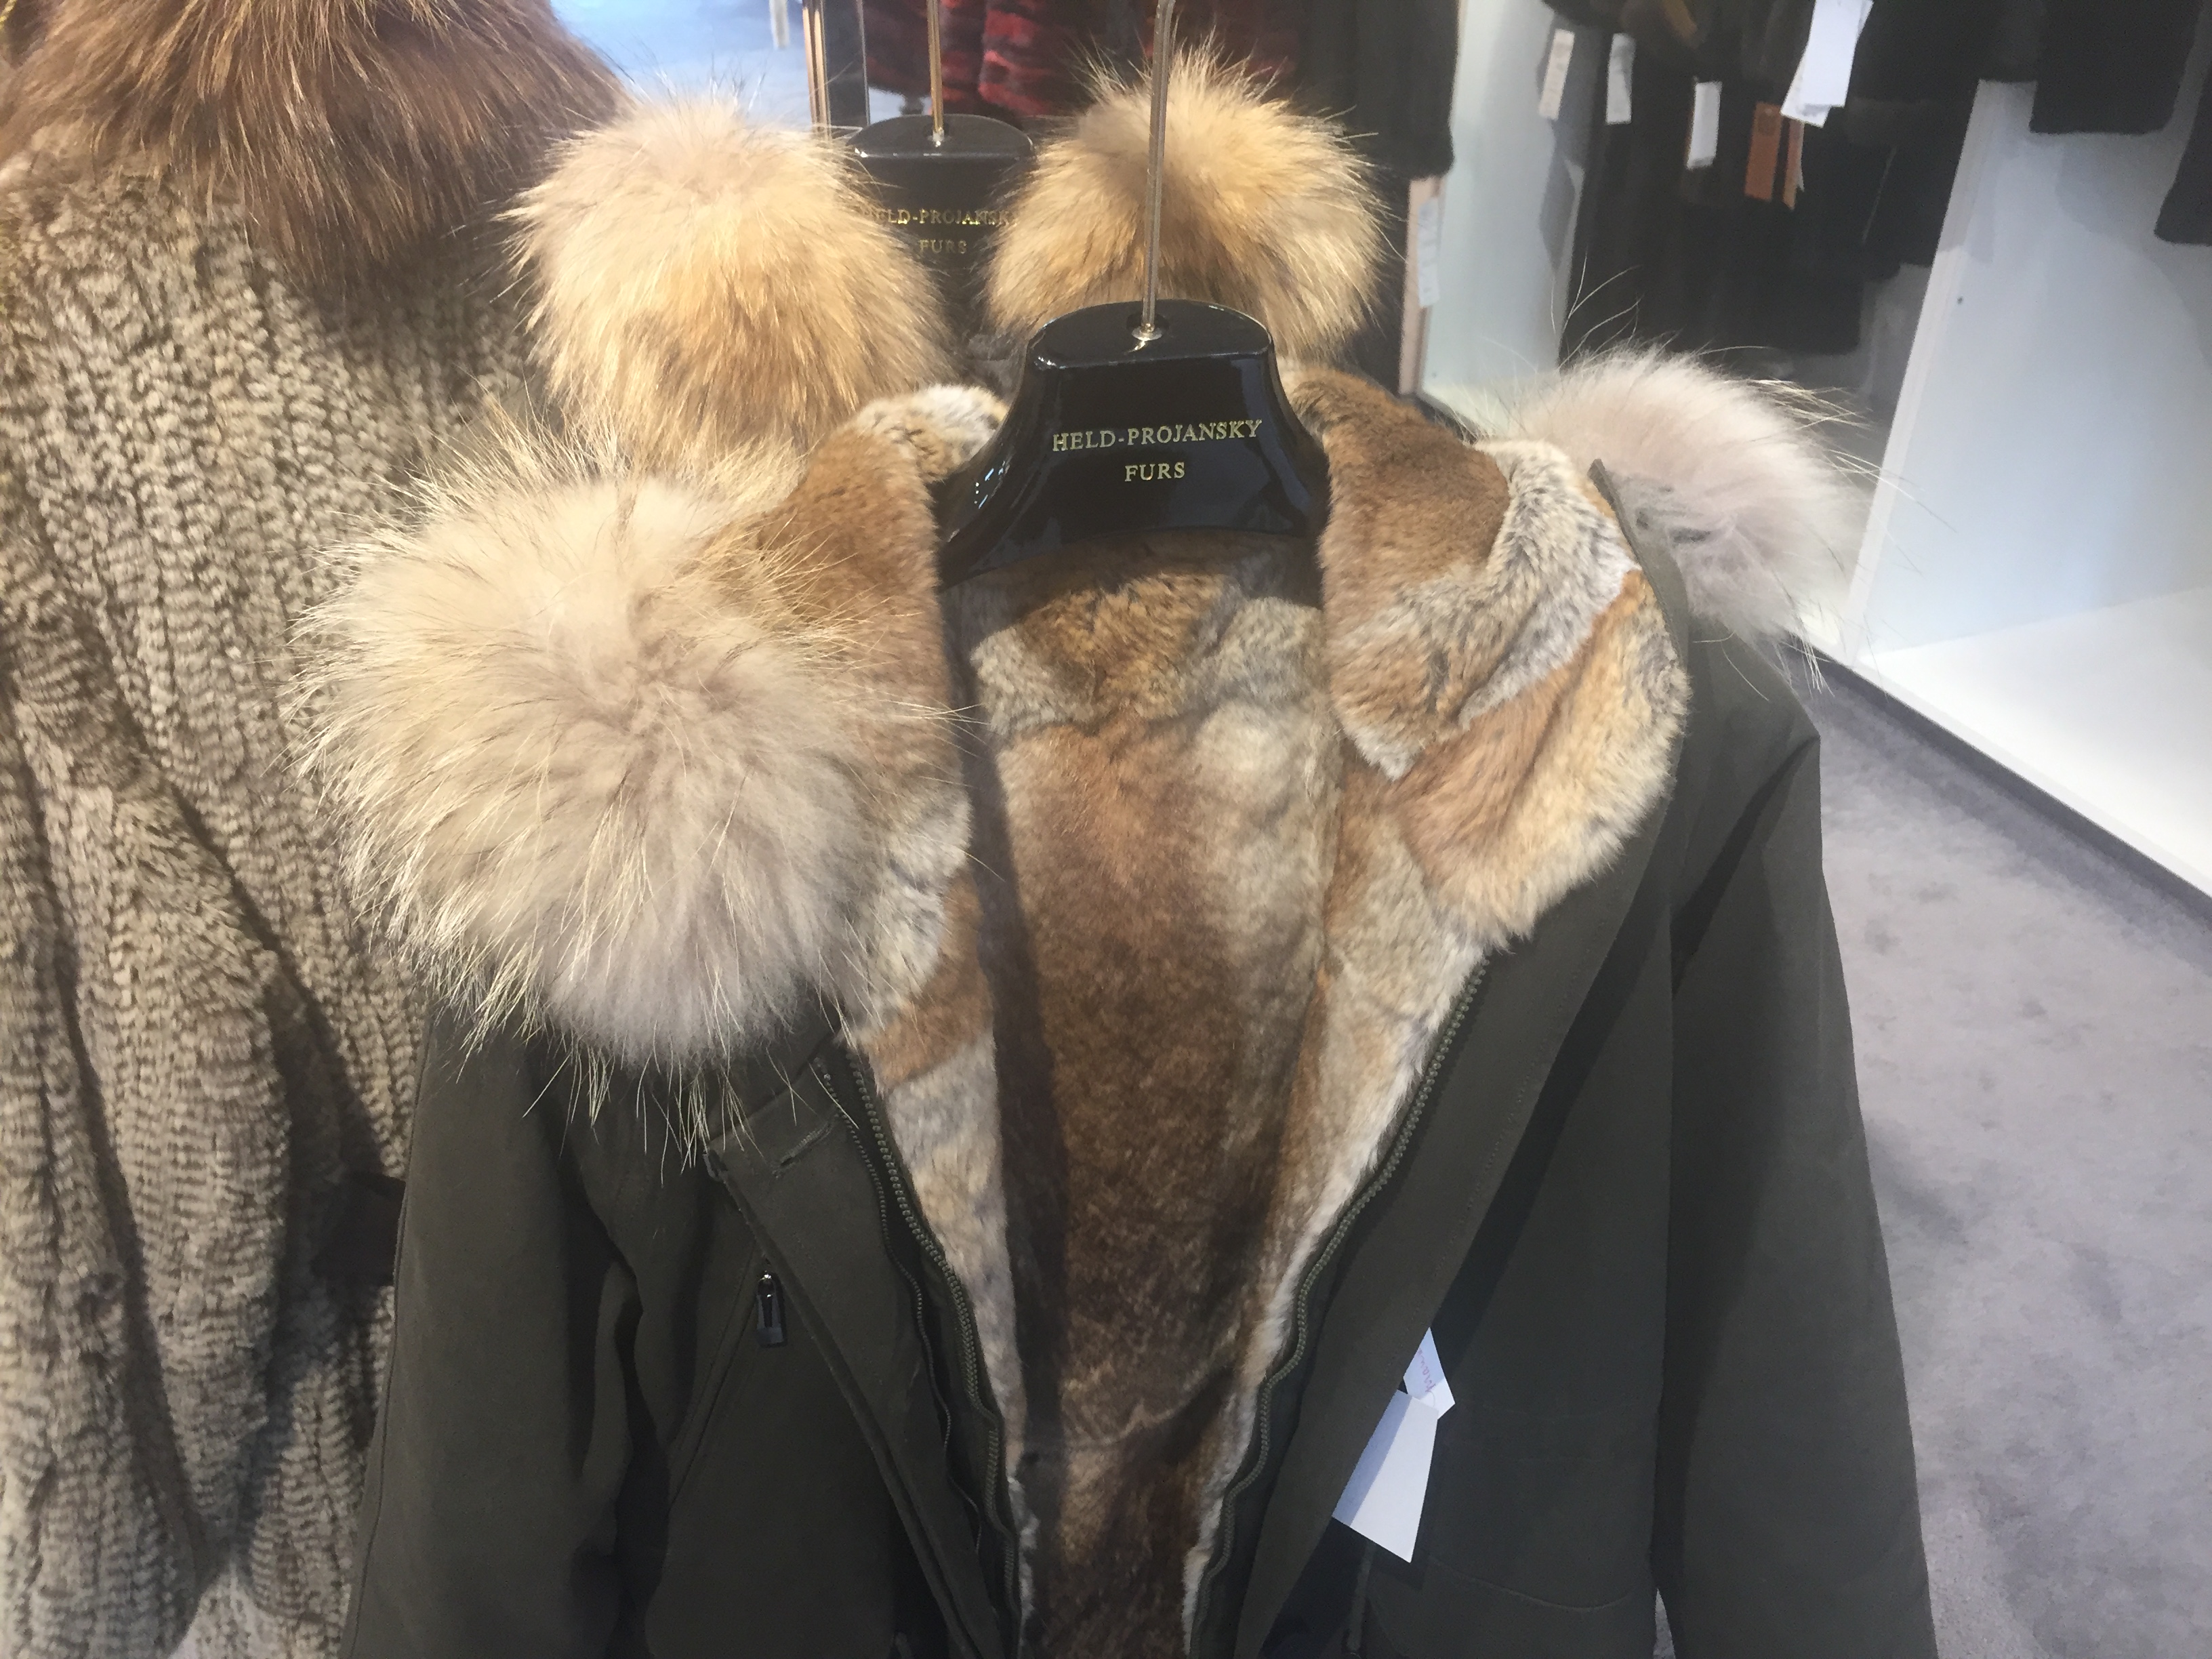 New Fall Fashion Arrivals in Rochester NY - Held Projansky Furs